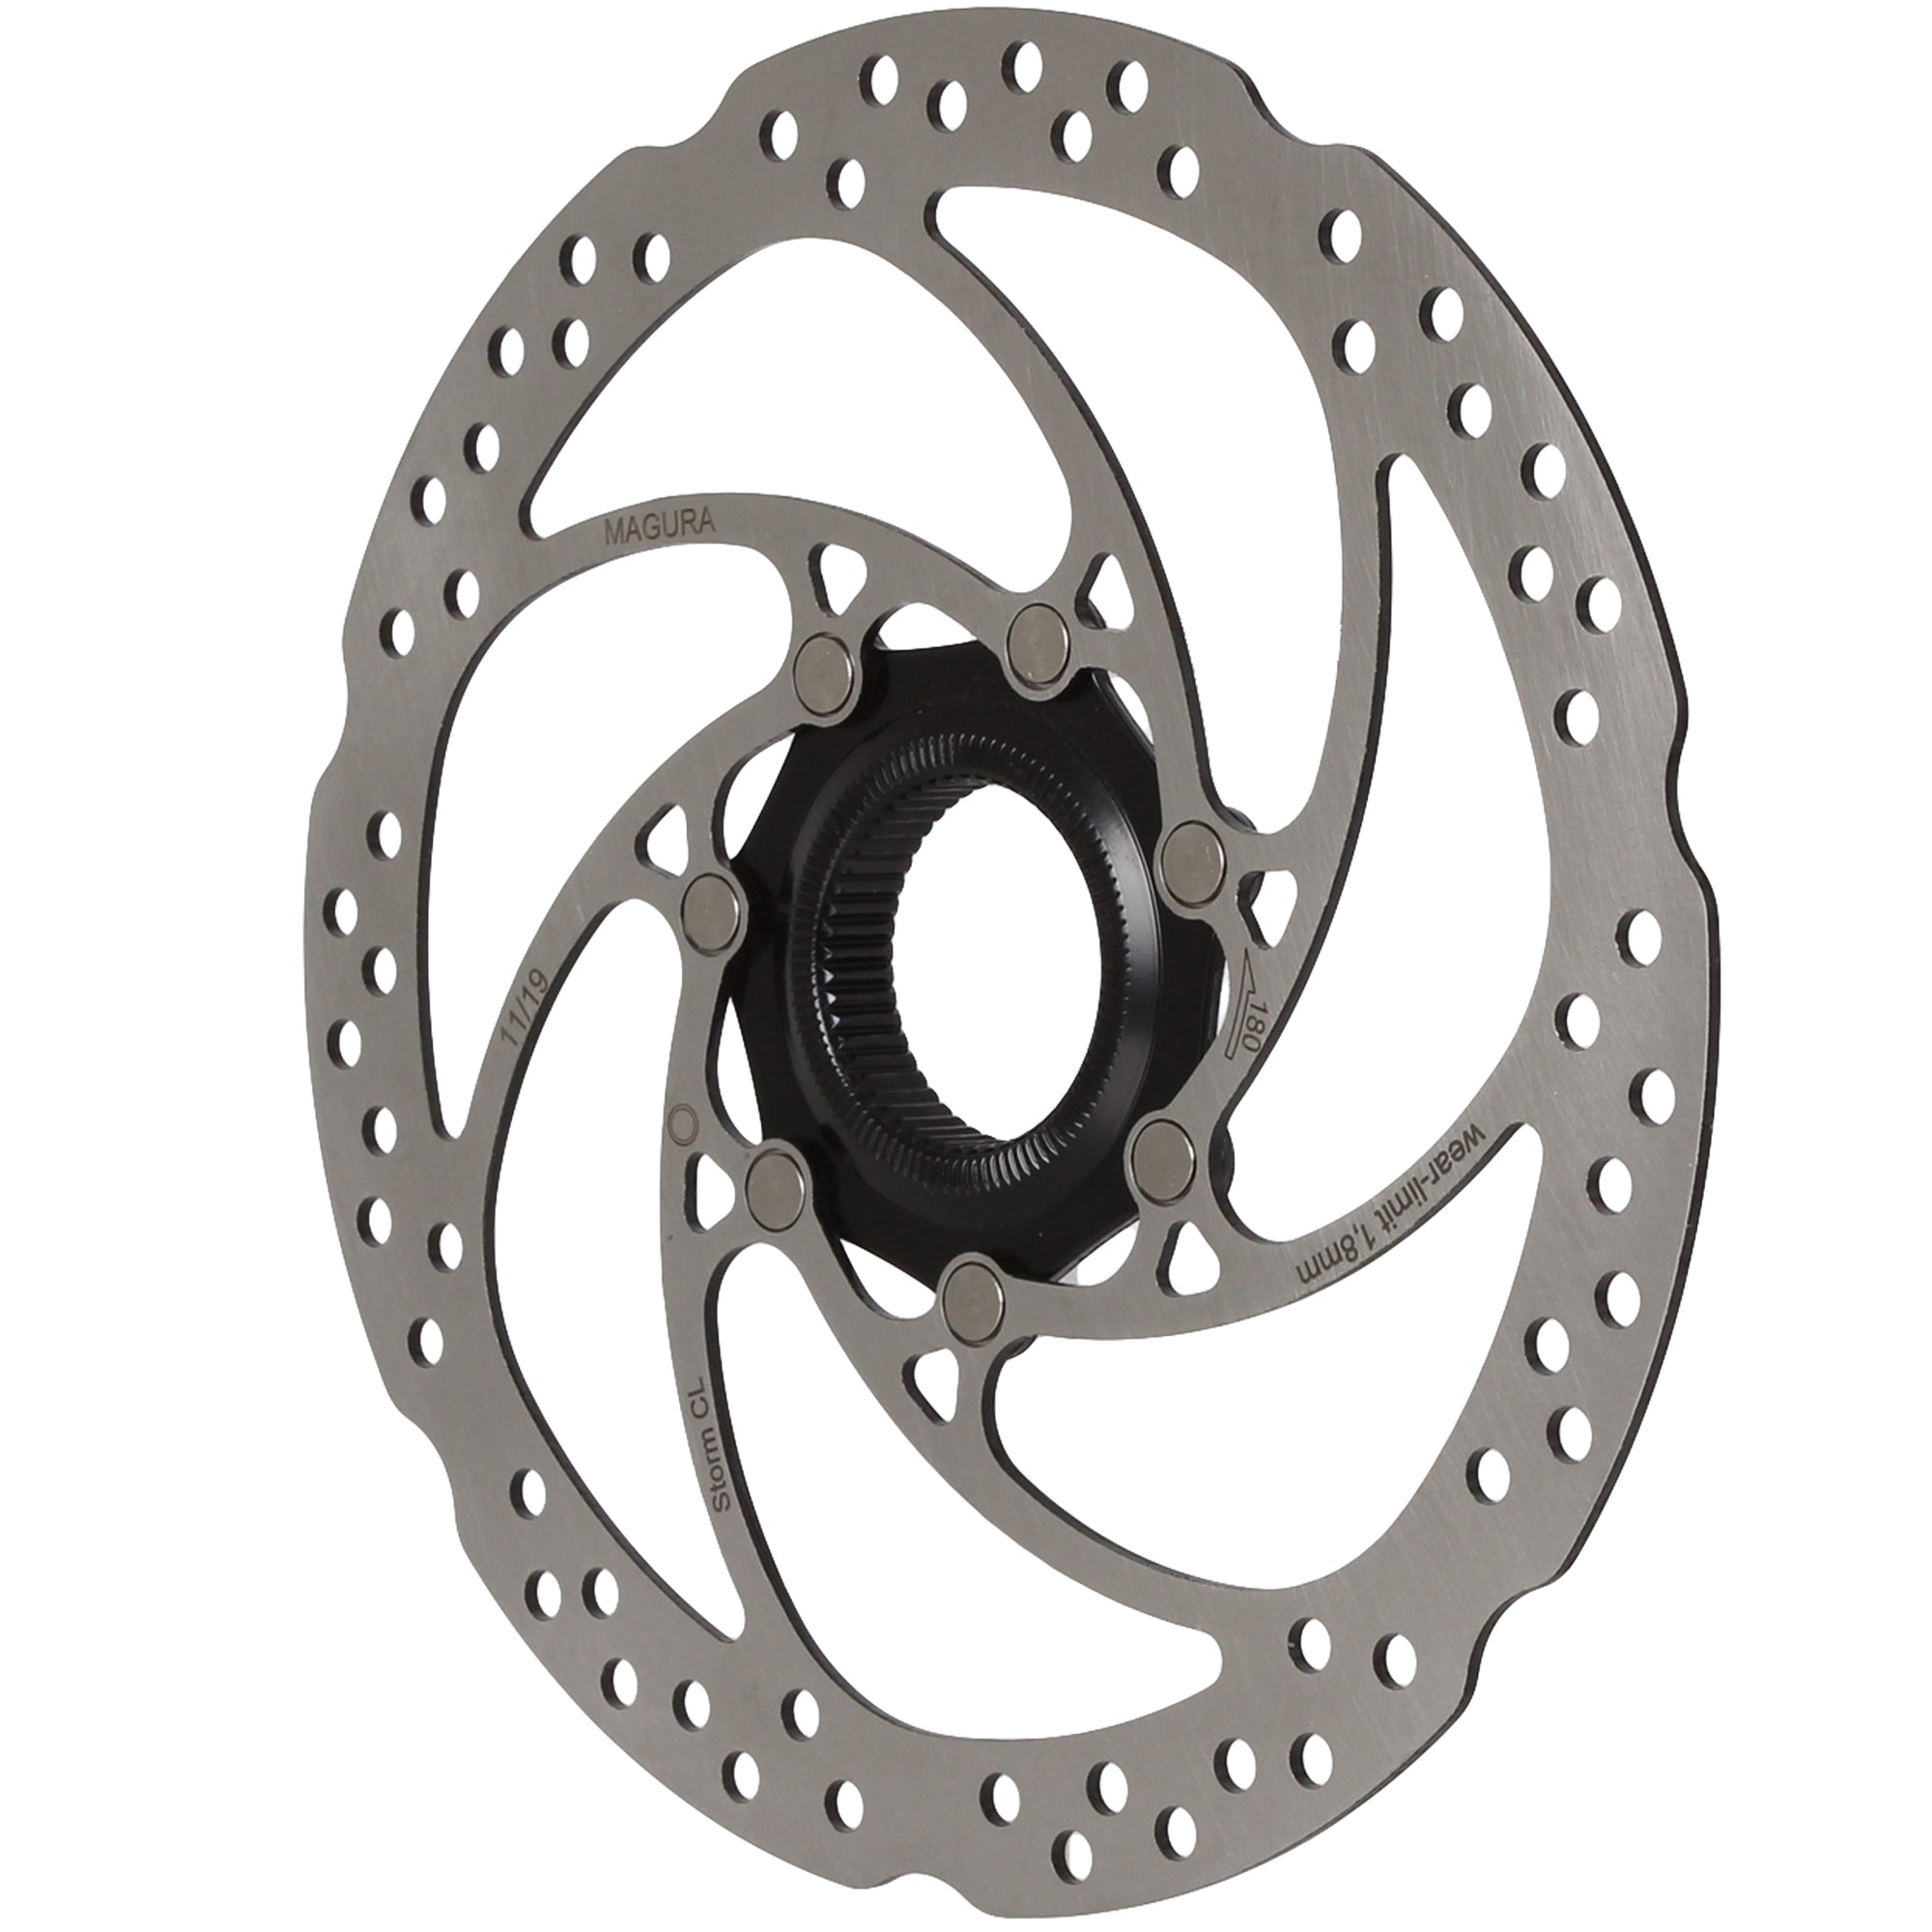 Magura Storm CL Disc Rotor Kit - 180mm - Downtown Bicycle Works 